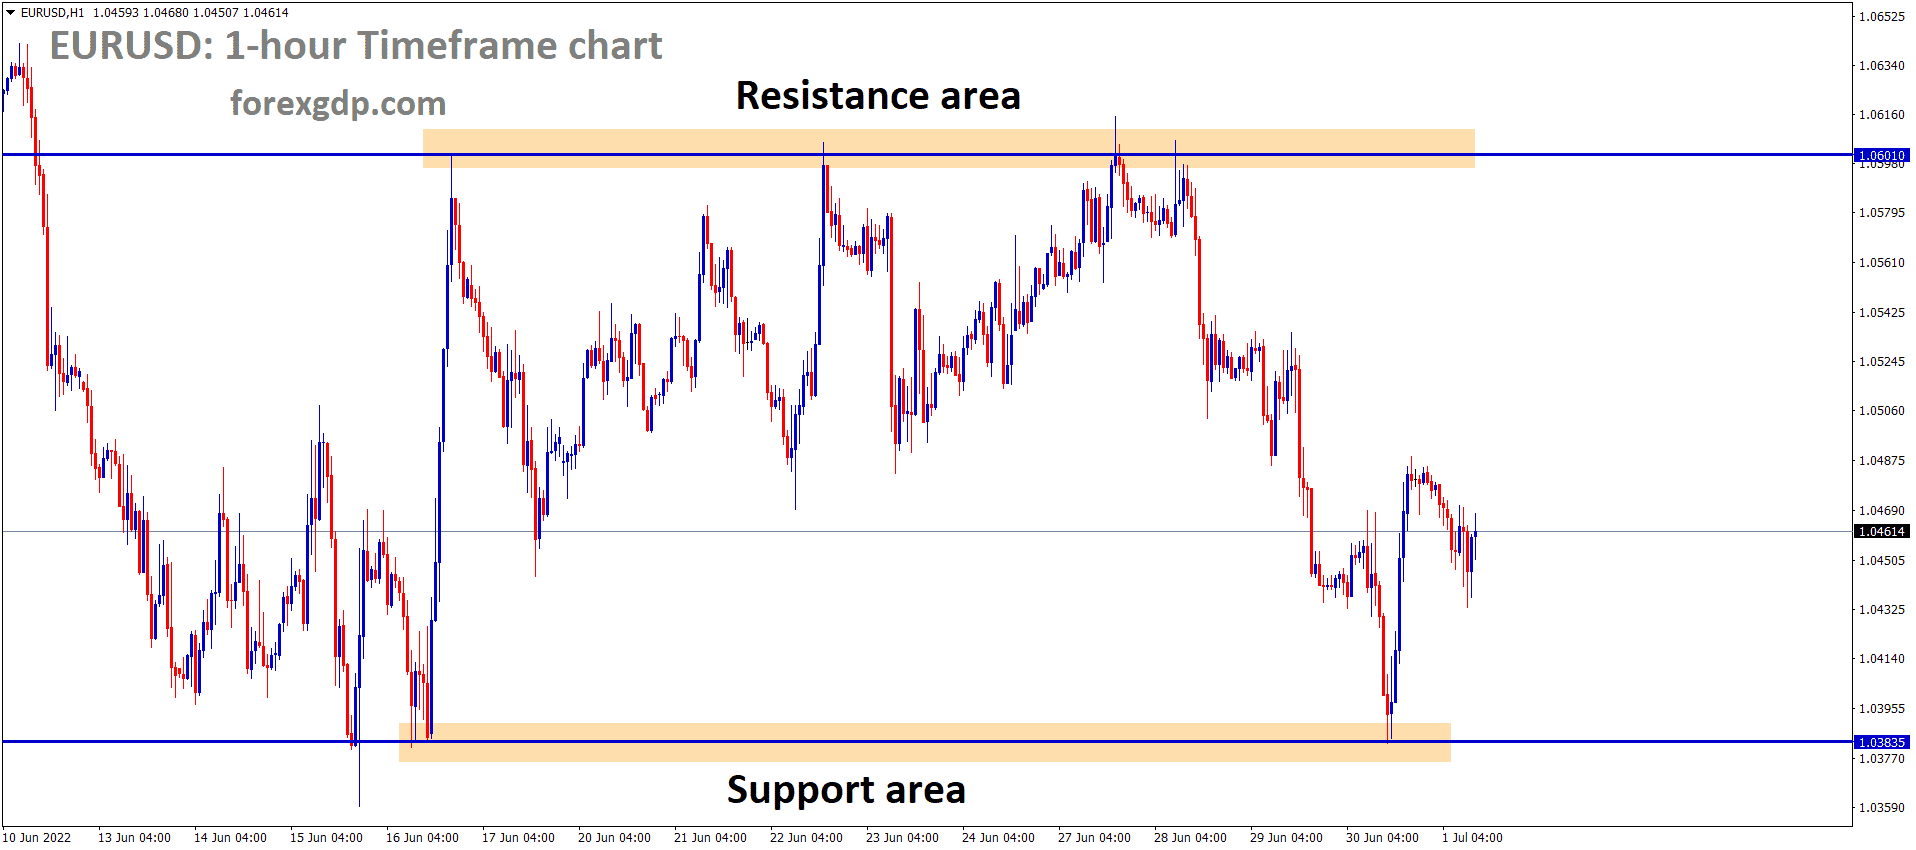 EURUSD is moving in the Box Pattern and the Market has rebounded from the Horizontal support area of the Pattern.